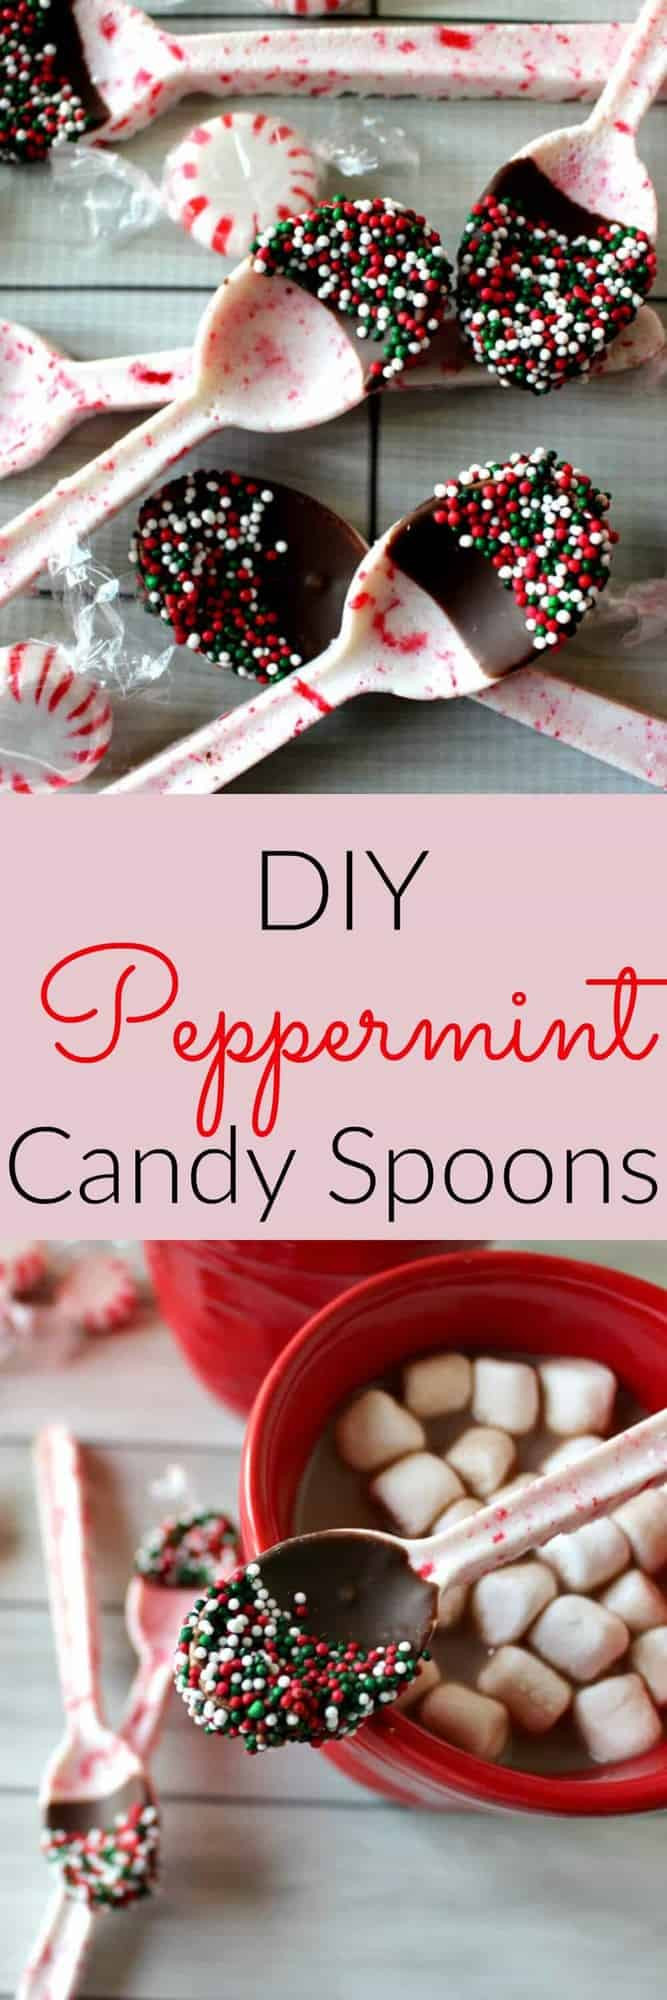 Cute Gift Ideas For Girls
 DIY Peppermint Candy Spoons Princess Pinky Girl